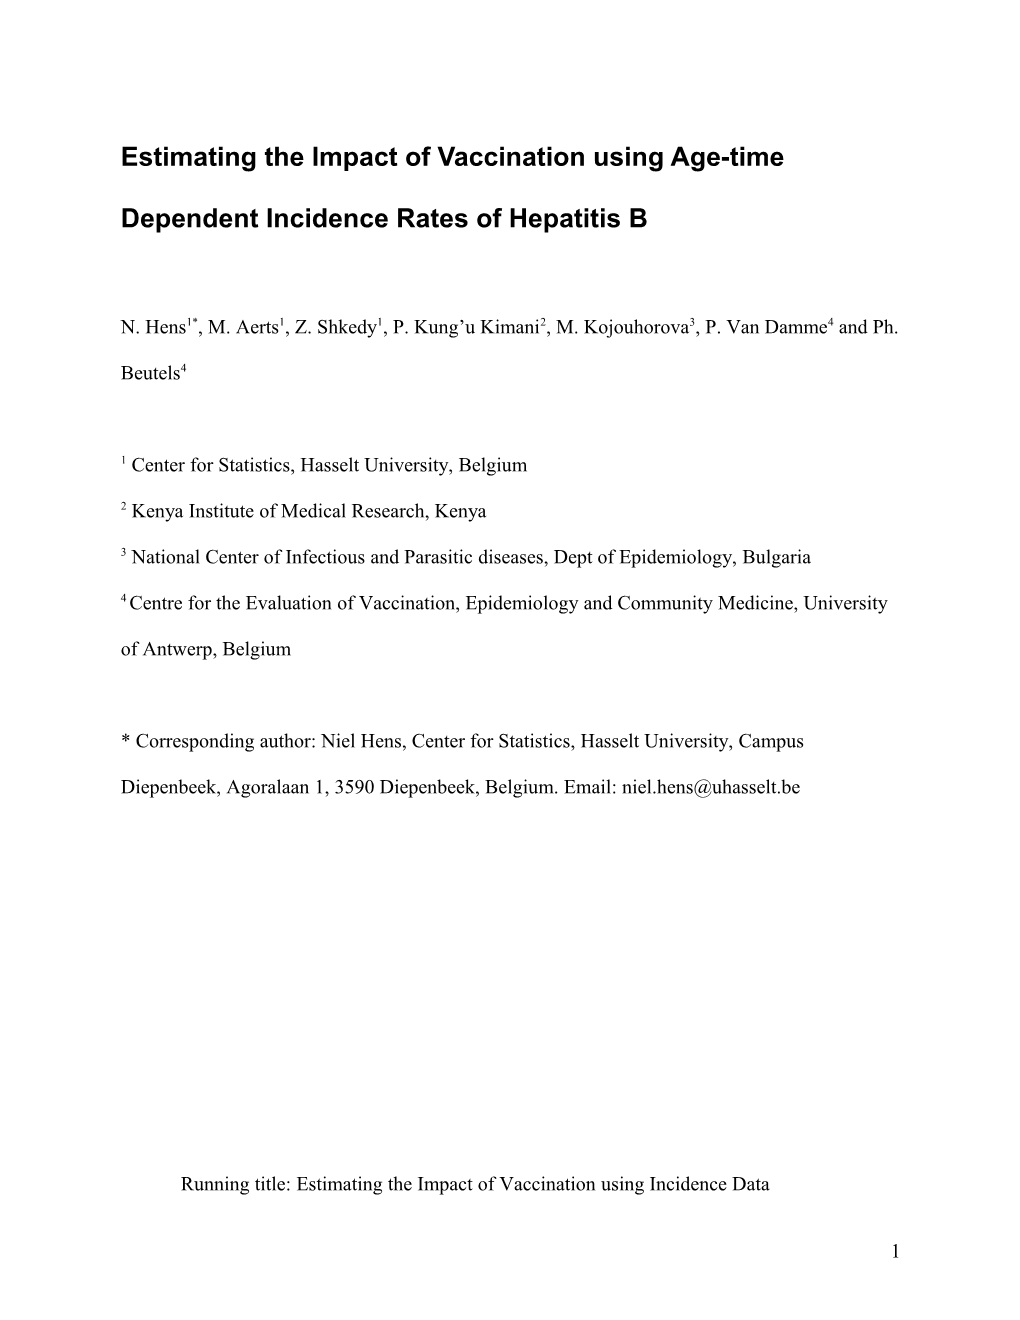 Estimating the Impact of Vaccination Using Age-Time Dependent Incidence Rates of Hepatitis B